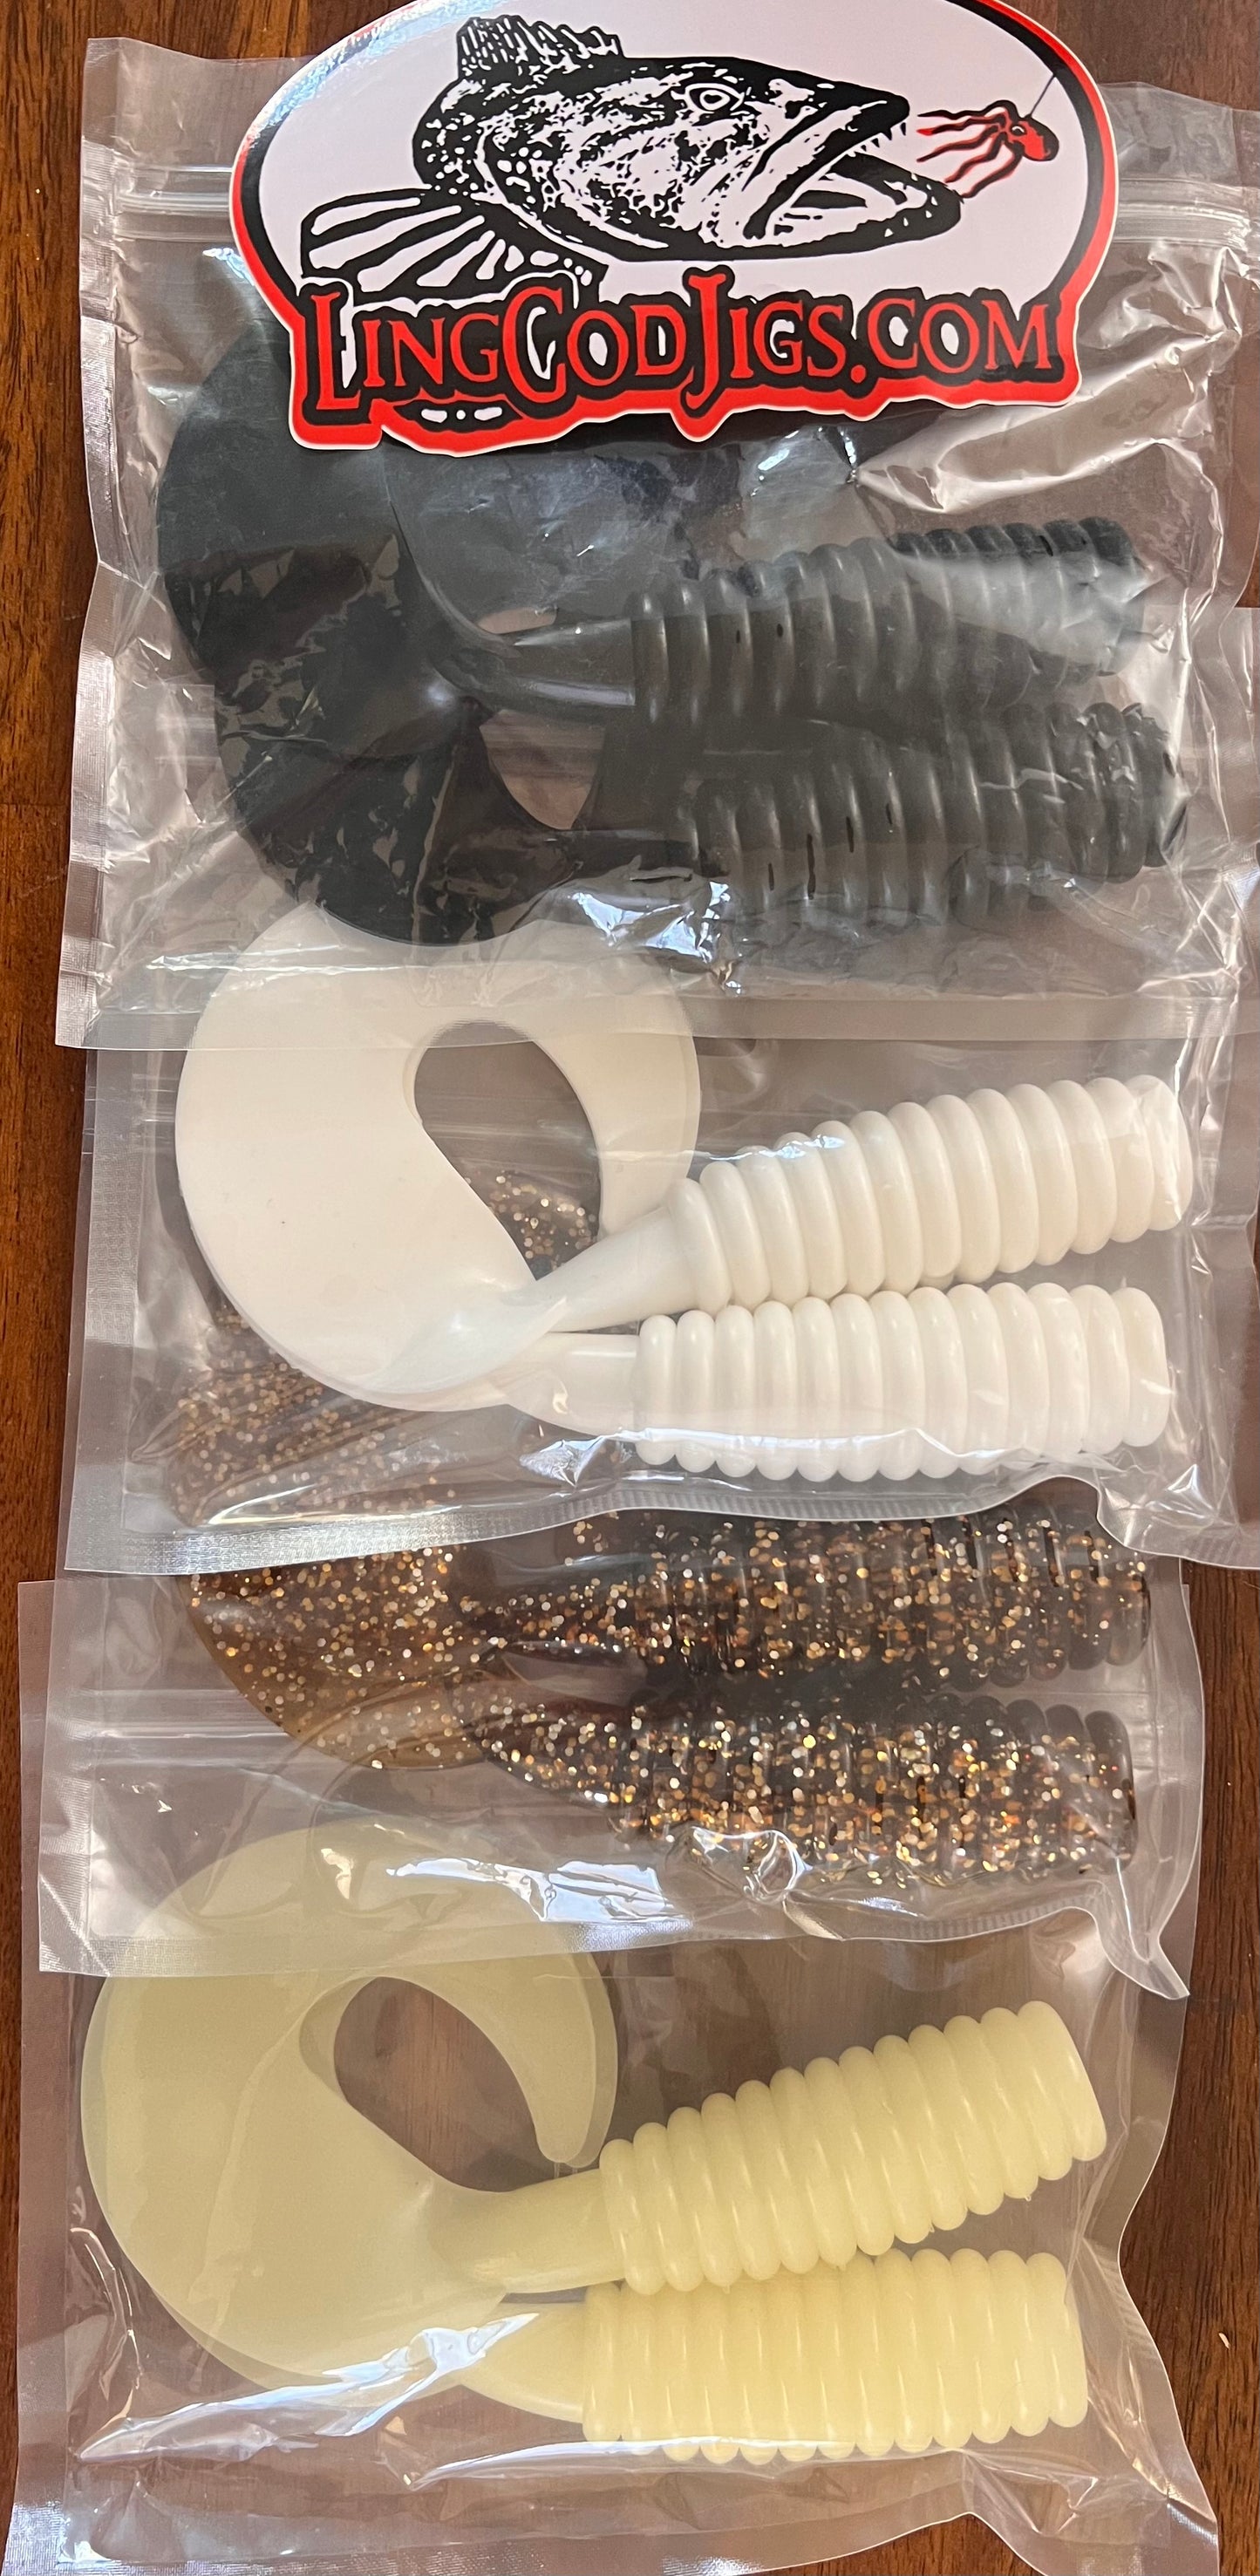 2 pack- 10” grub tails